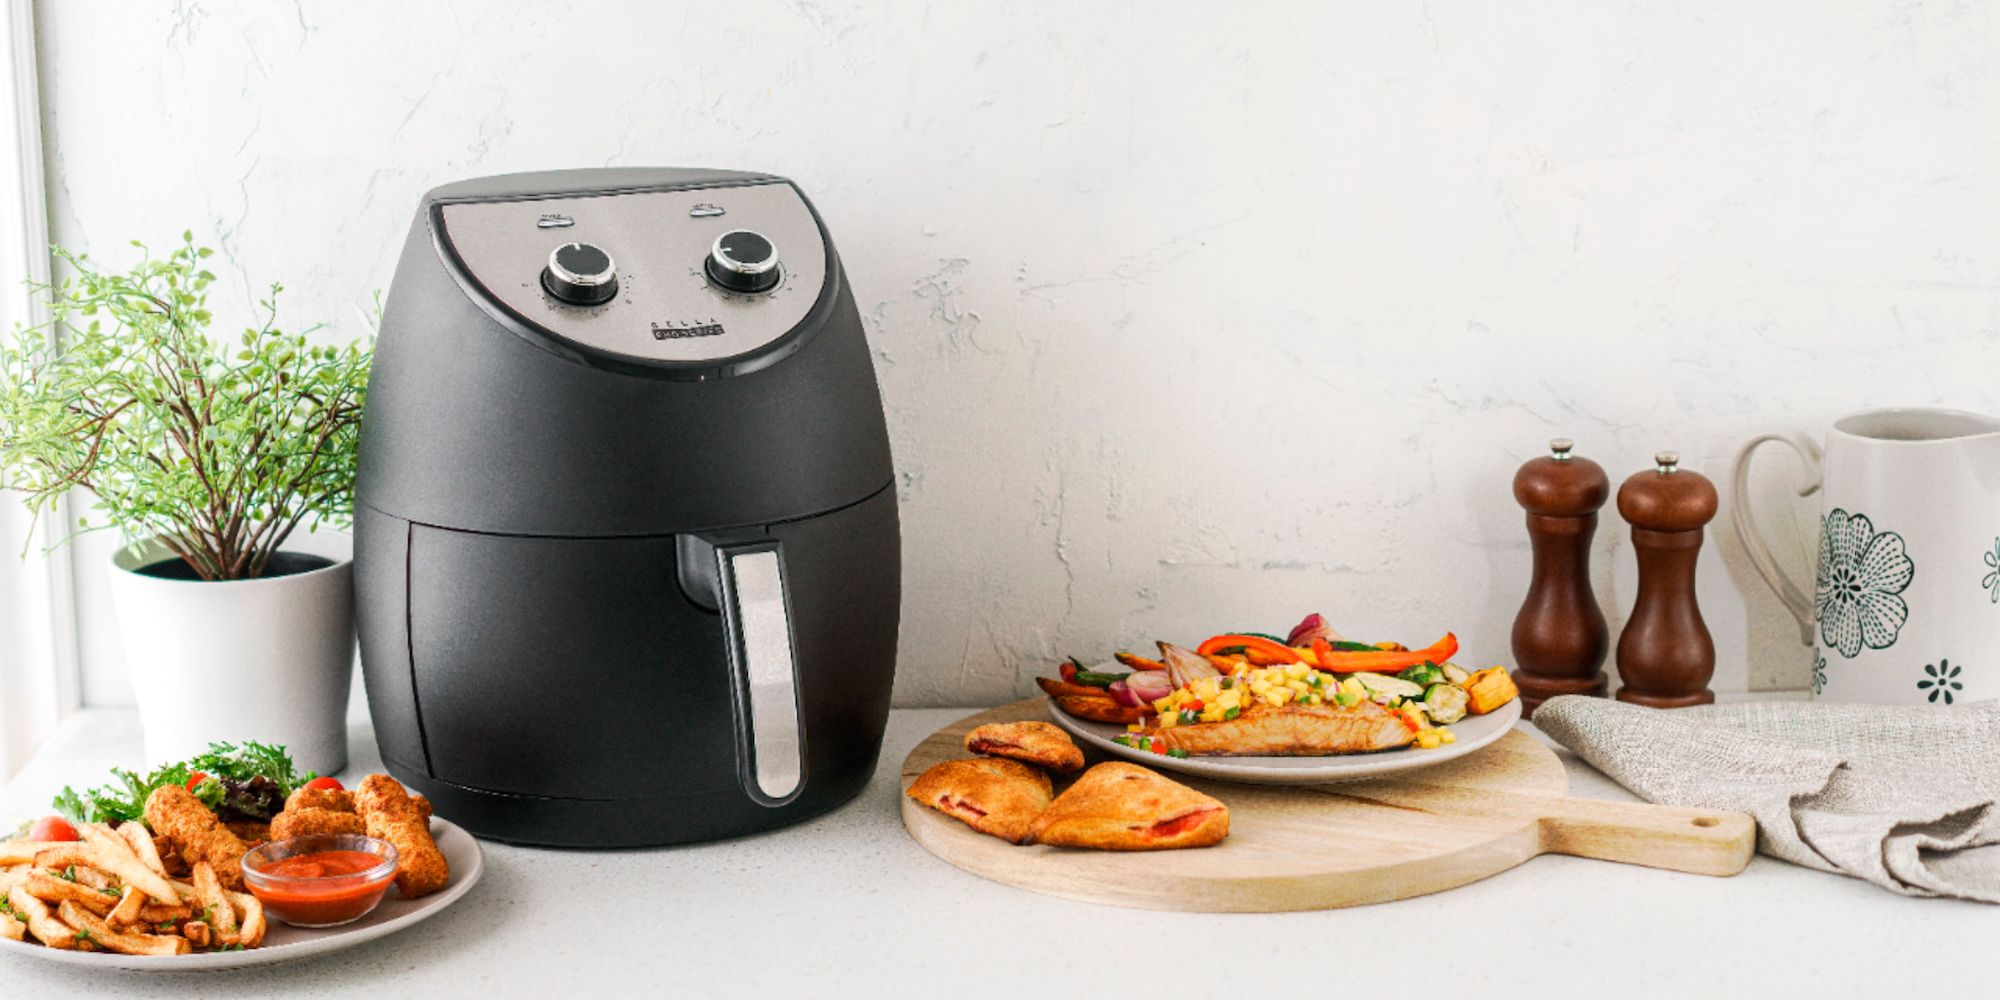 https://9to5toys.com/wp-content/uploads/sites/5/2021/01/Bella-Pro-Series-Analog-Air-Fryer.jpg